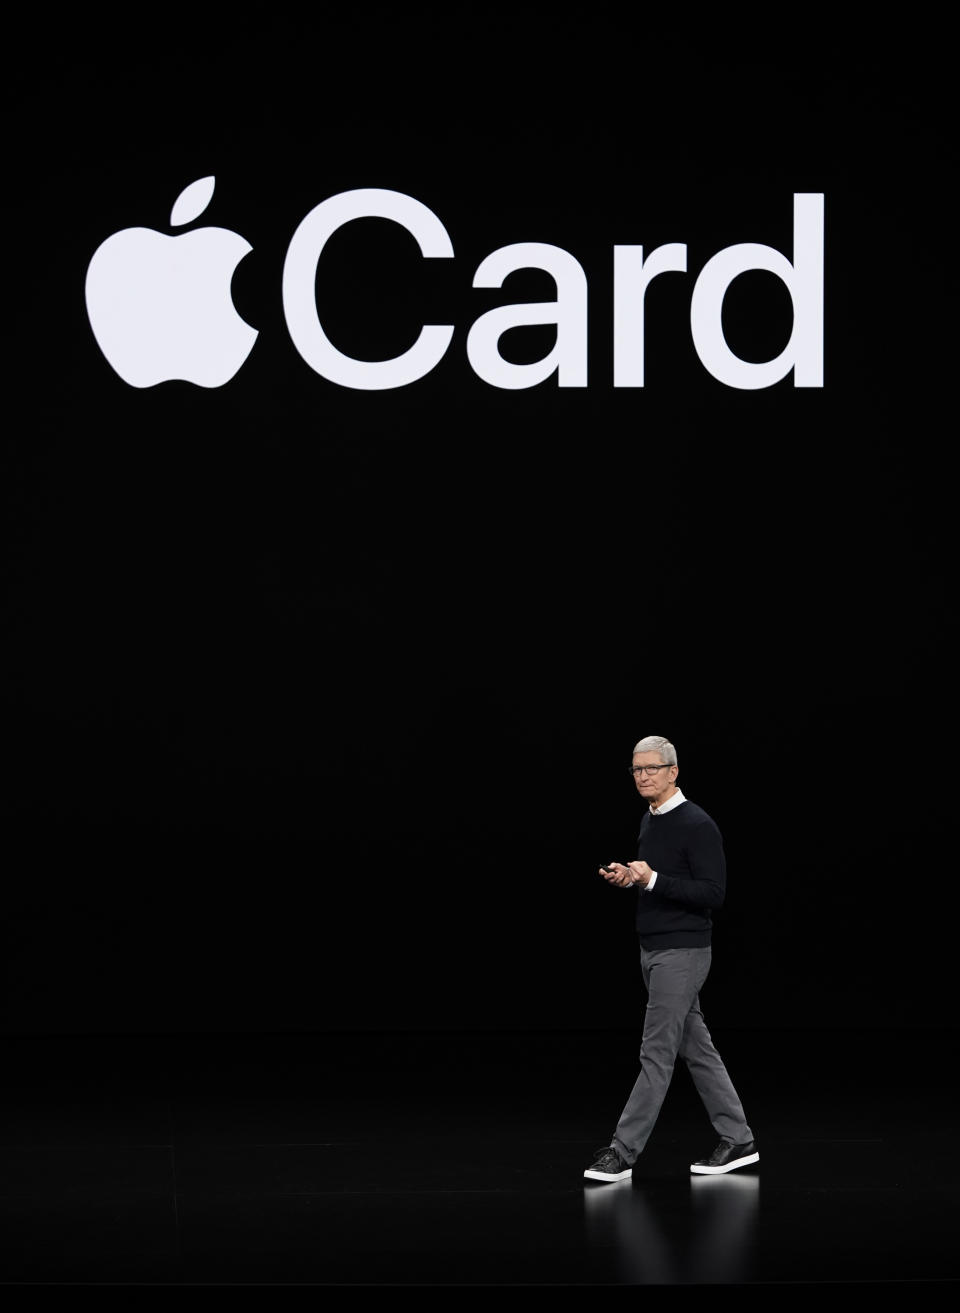 Apple CEO Tim Cook speaks at the Steve Jobs Theater during an event to announce new products Monday, March 25, 2019, in Cupertino, Calif. (AP Photo/Tony Avelar)